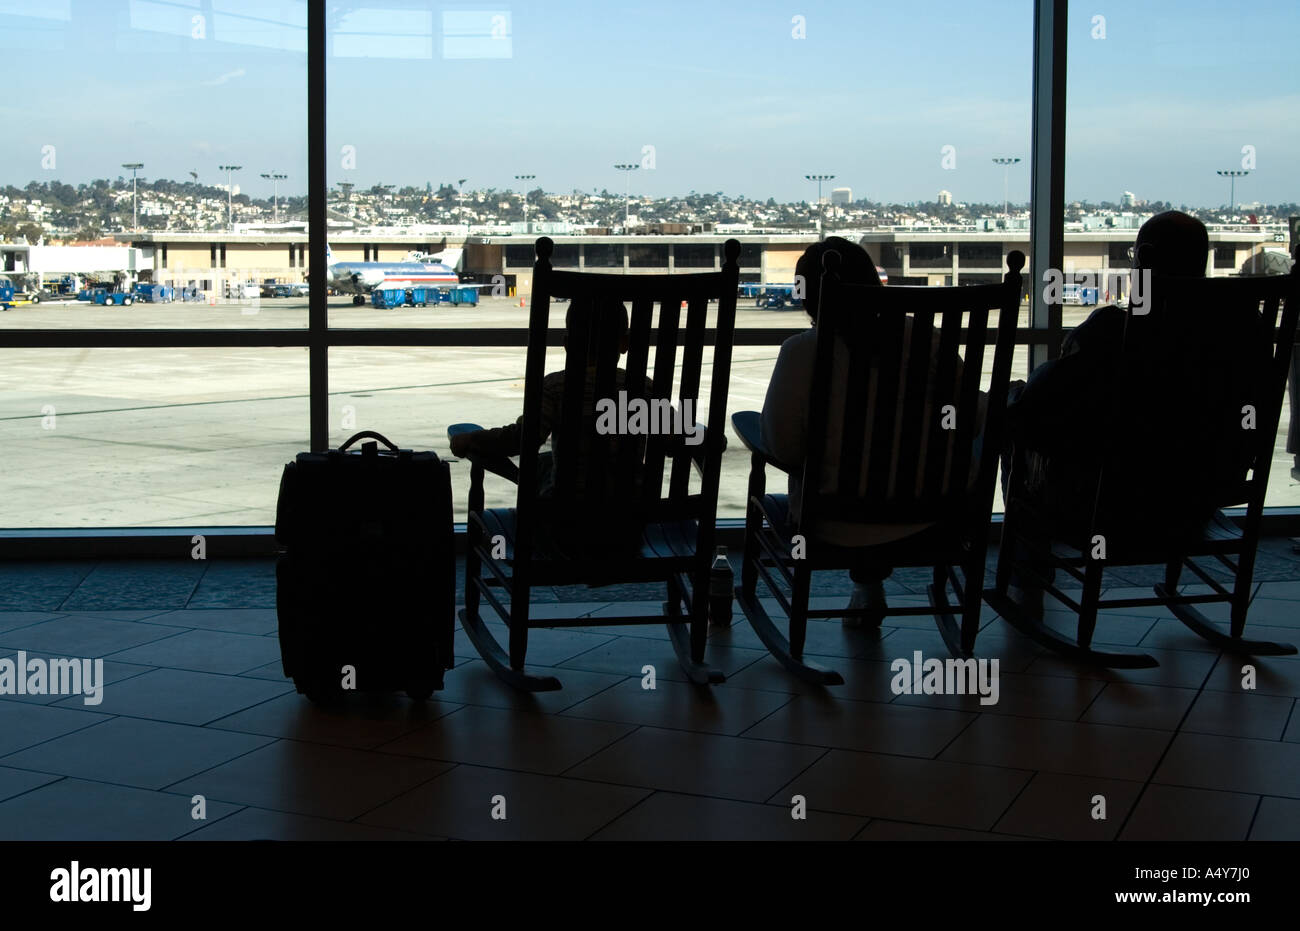 Family Waits In San Airport Rocking Chairs San Diego Ca Usa Stock